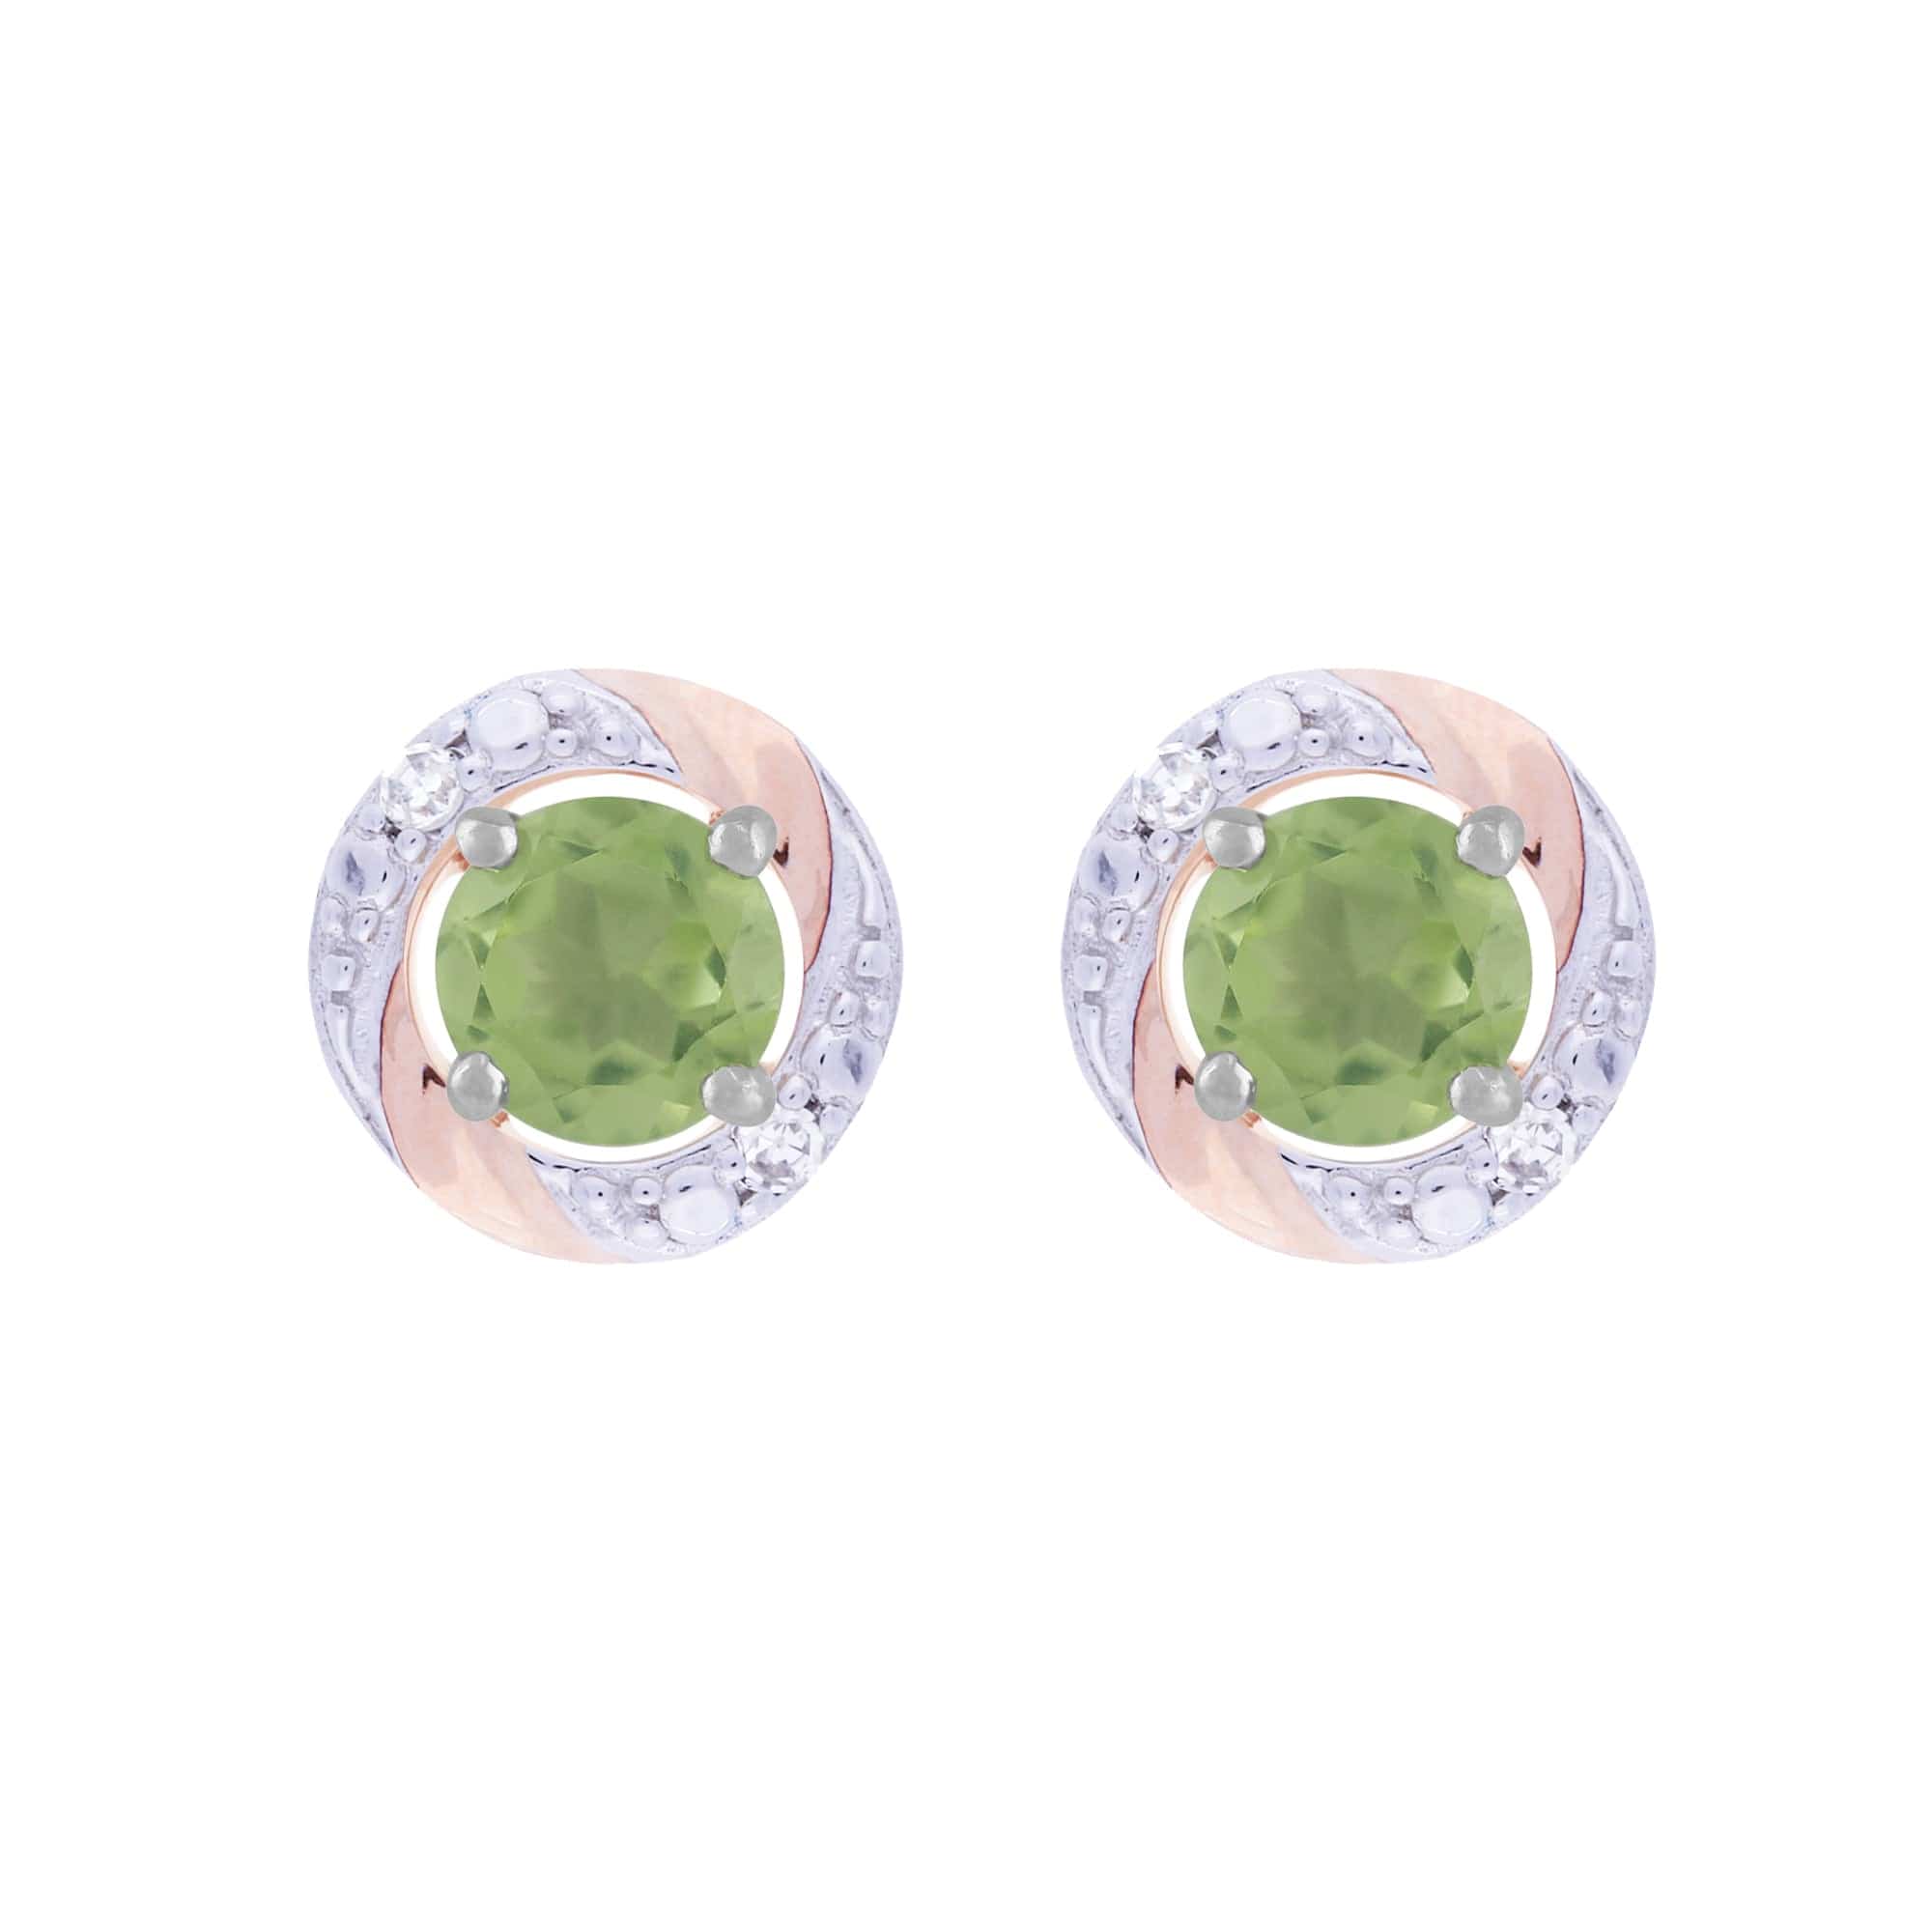 11614-191E0378019 Classic Round Peridot Stud Earrings with Detachable Diamond Round Earrings Jacket Set in 9ct White Gold 1